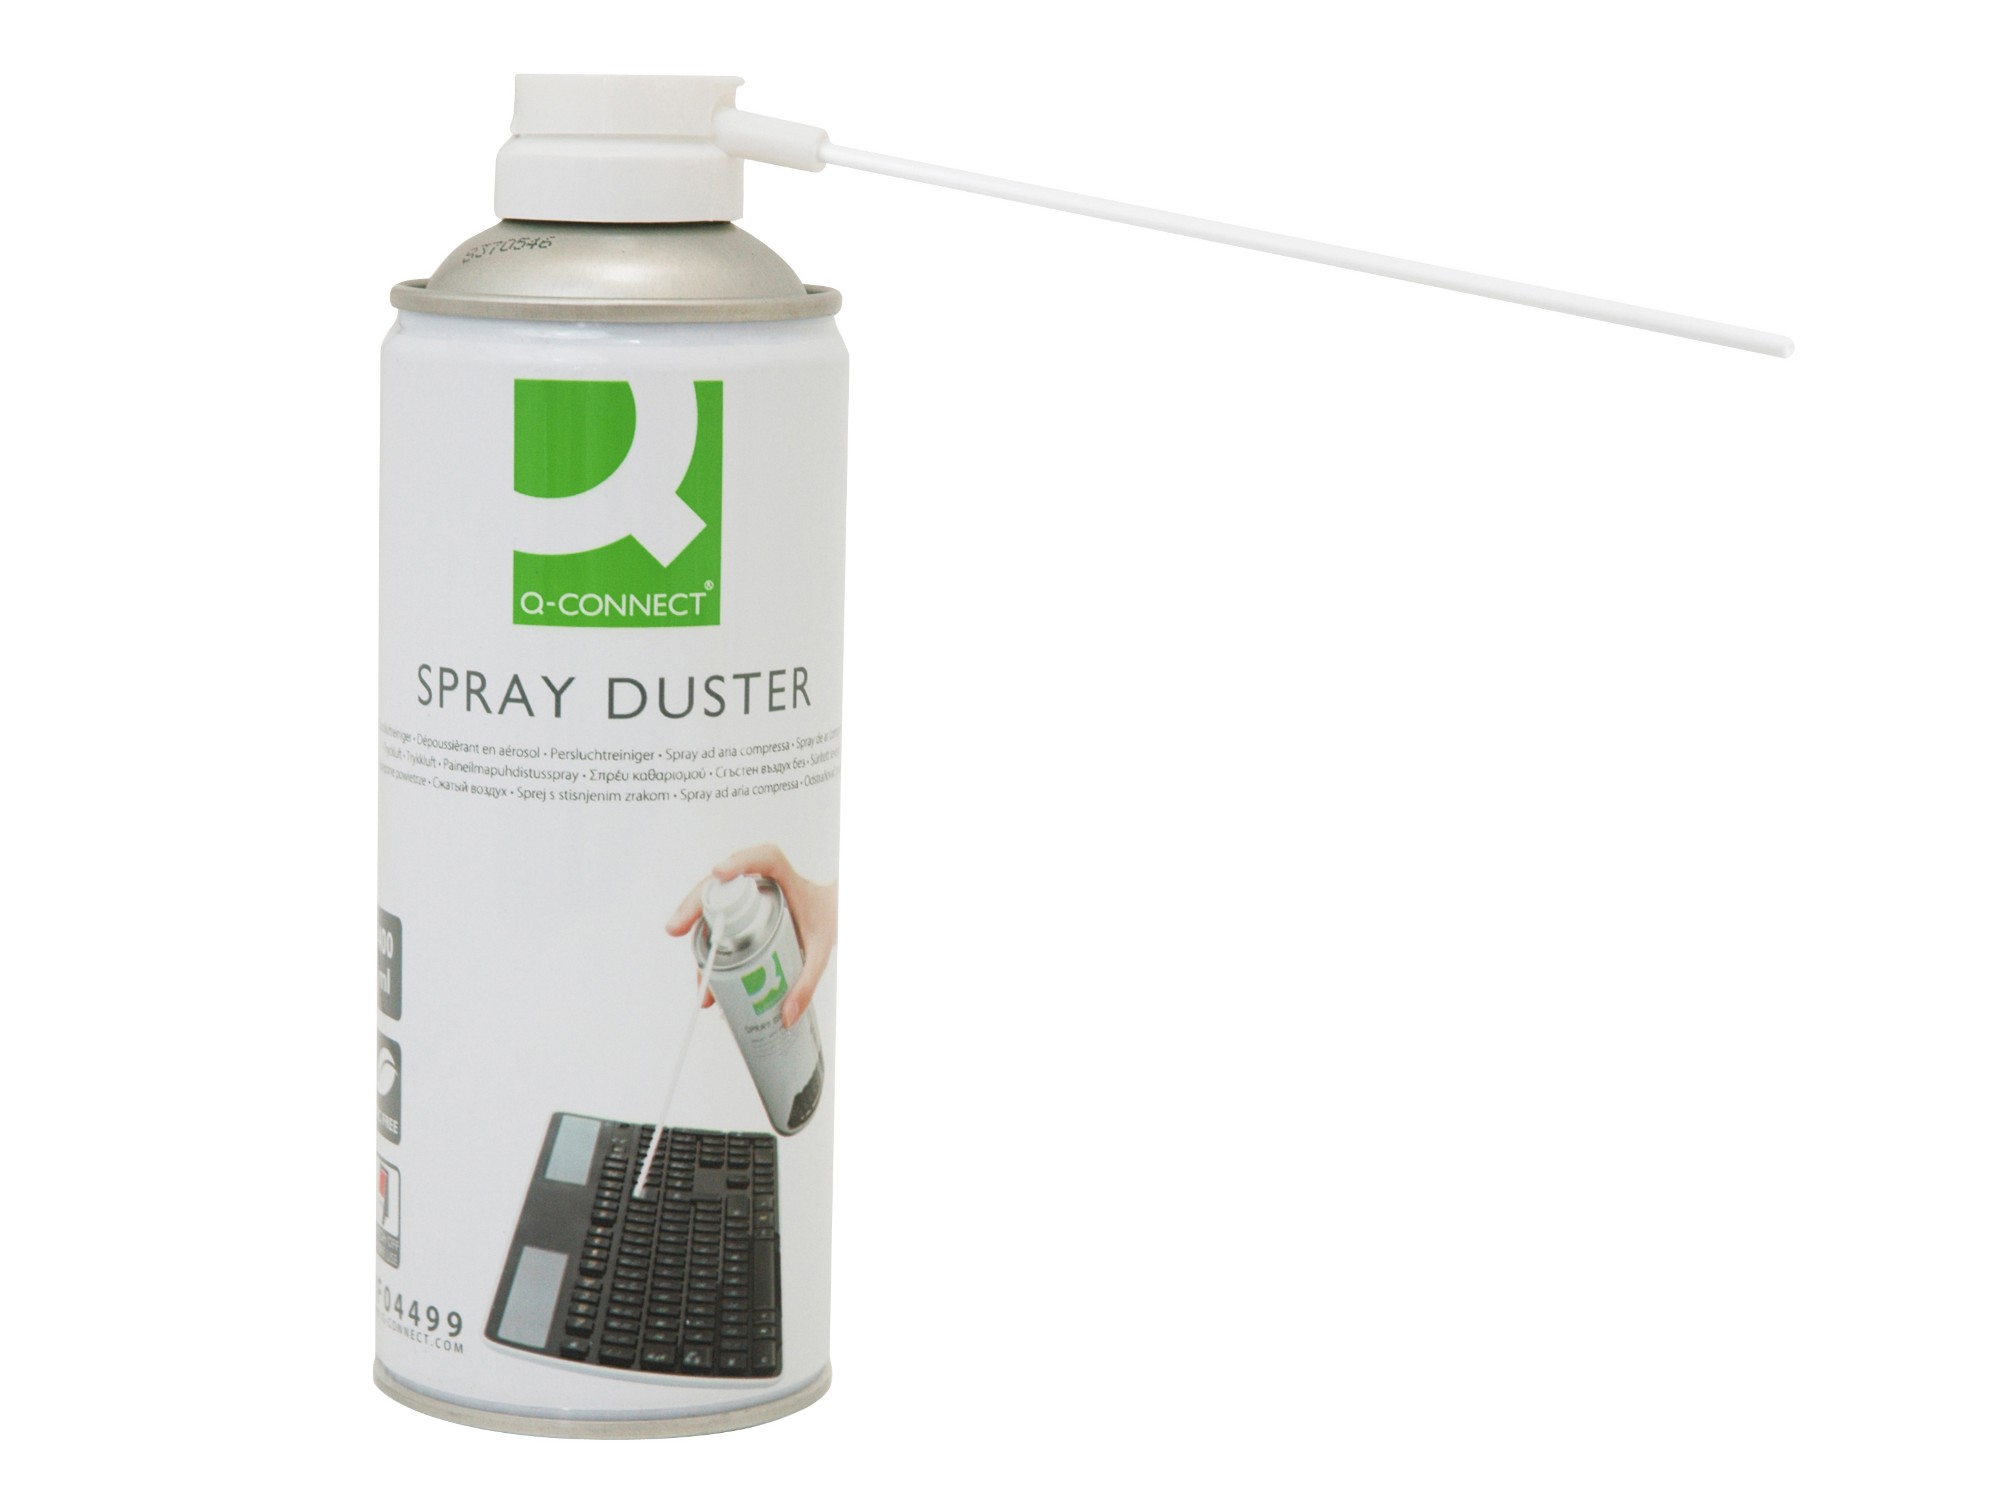 Q-CONNECT KF04499 compressed air duster